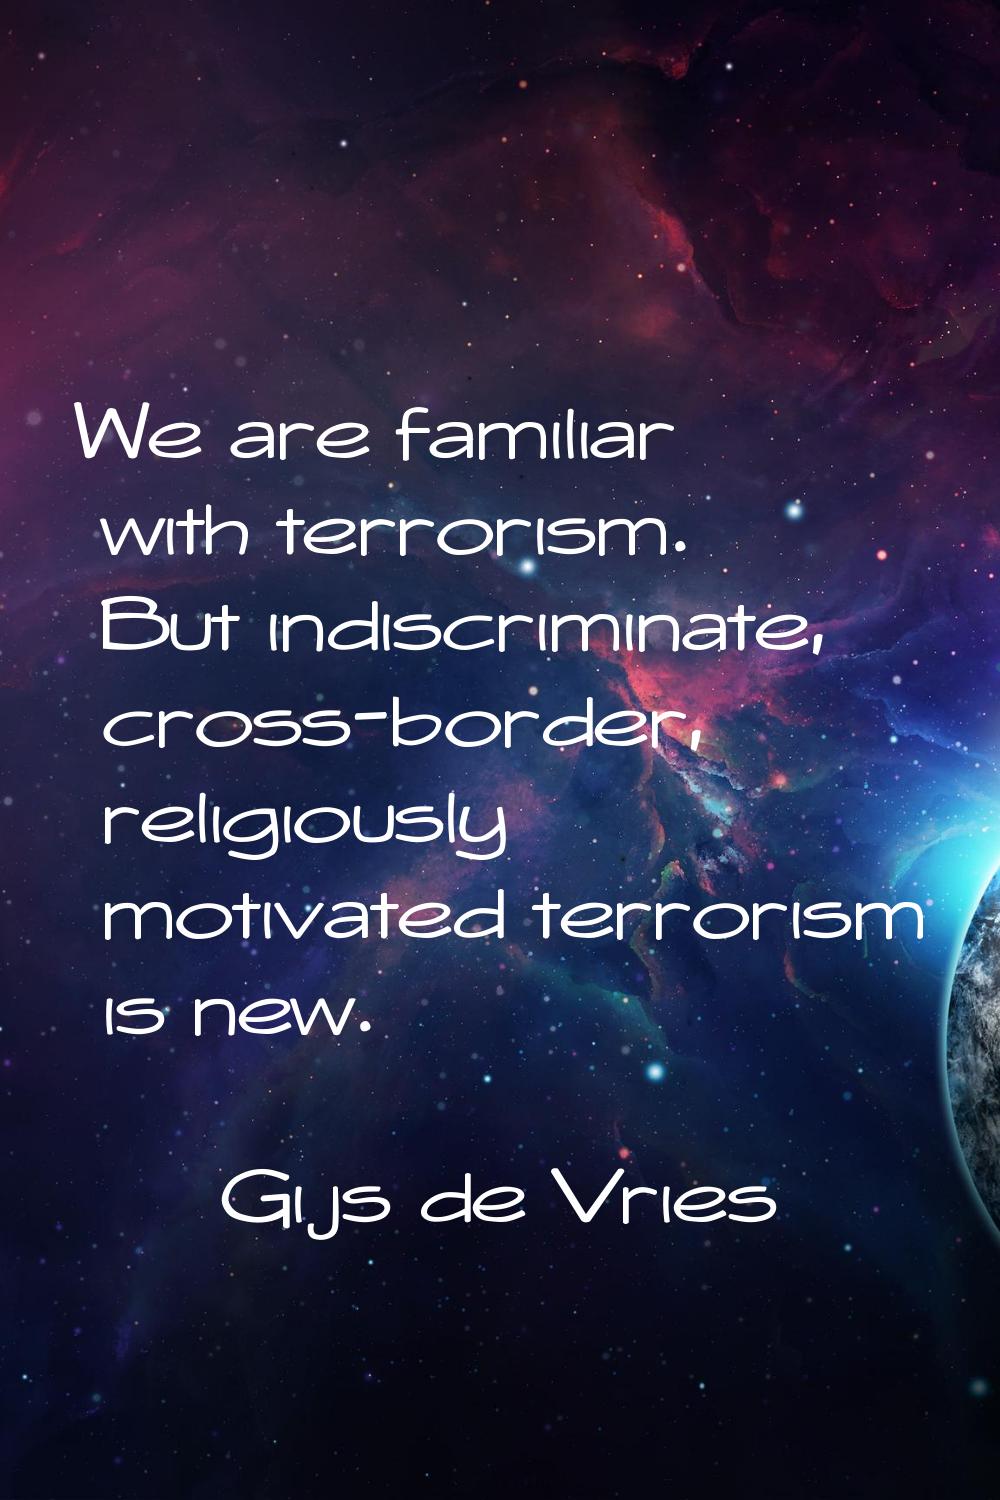 We are familiar with terrorism. But indiscriminate, cross-border, religiously motivated terrorism i